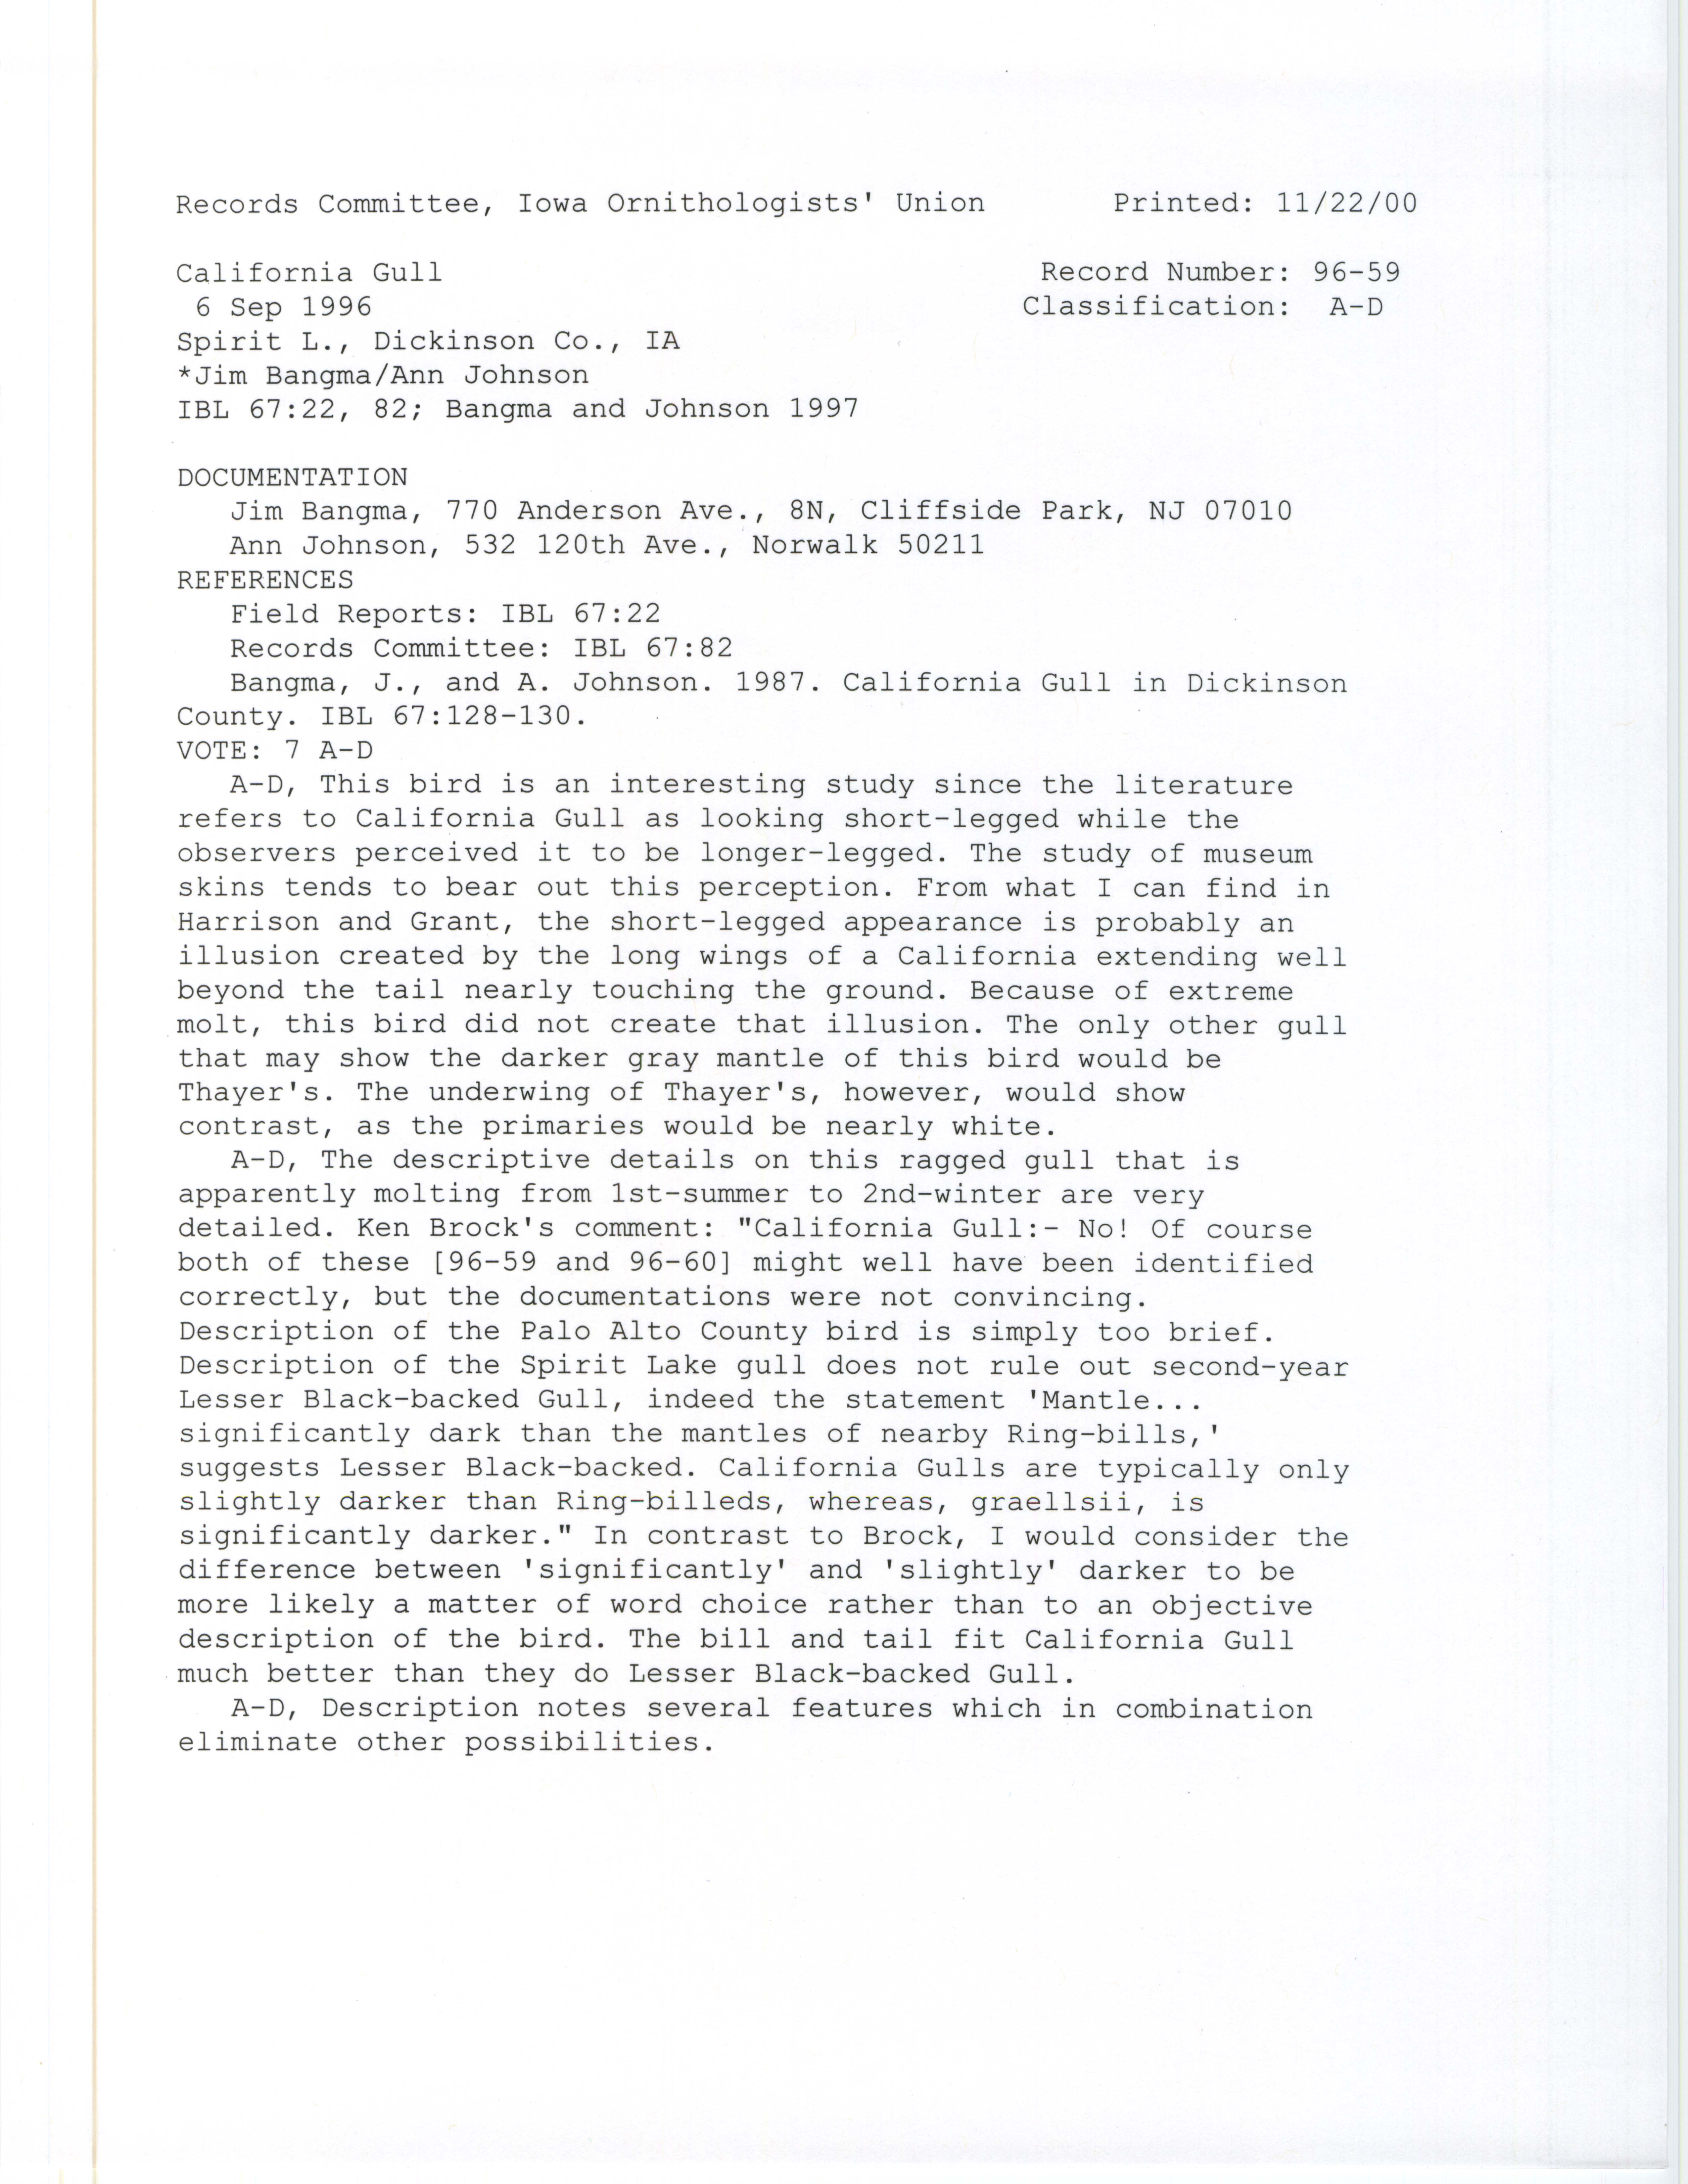 Records Committee review for rare bird sighting of California Gull at Mini-Wakan State Park, 1996